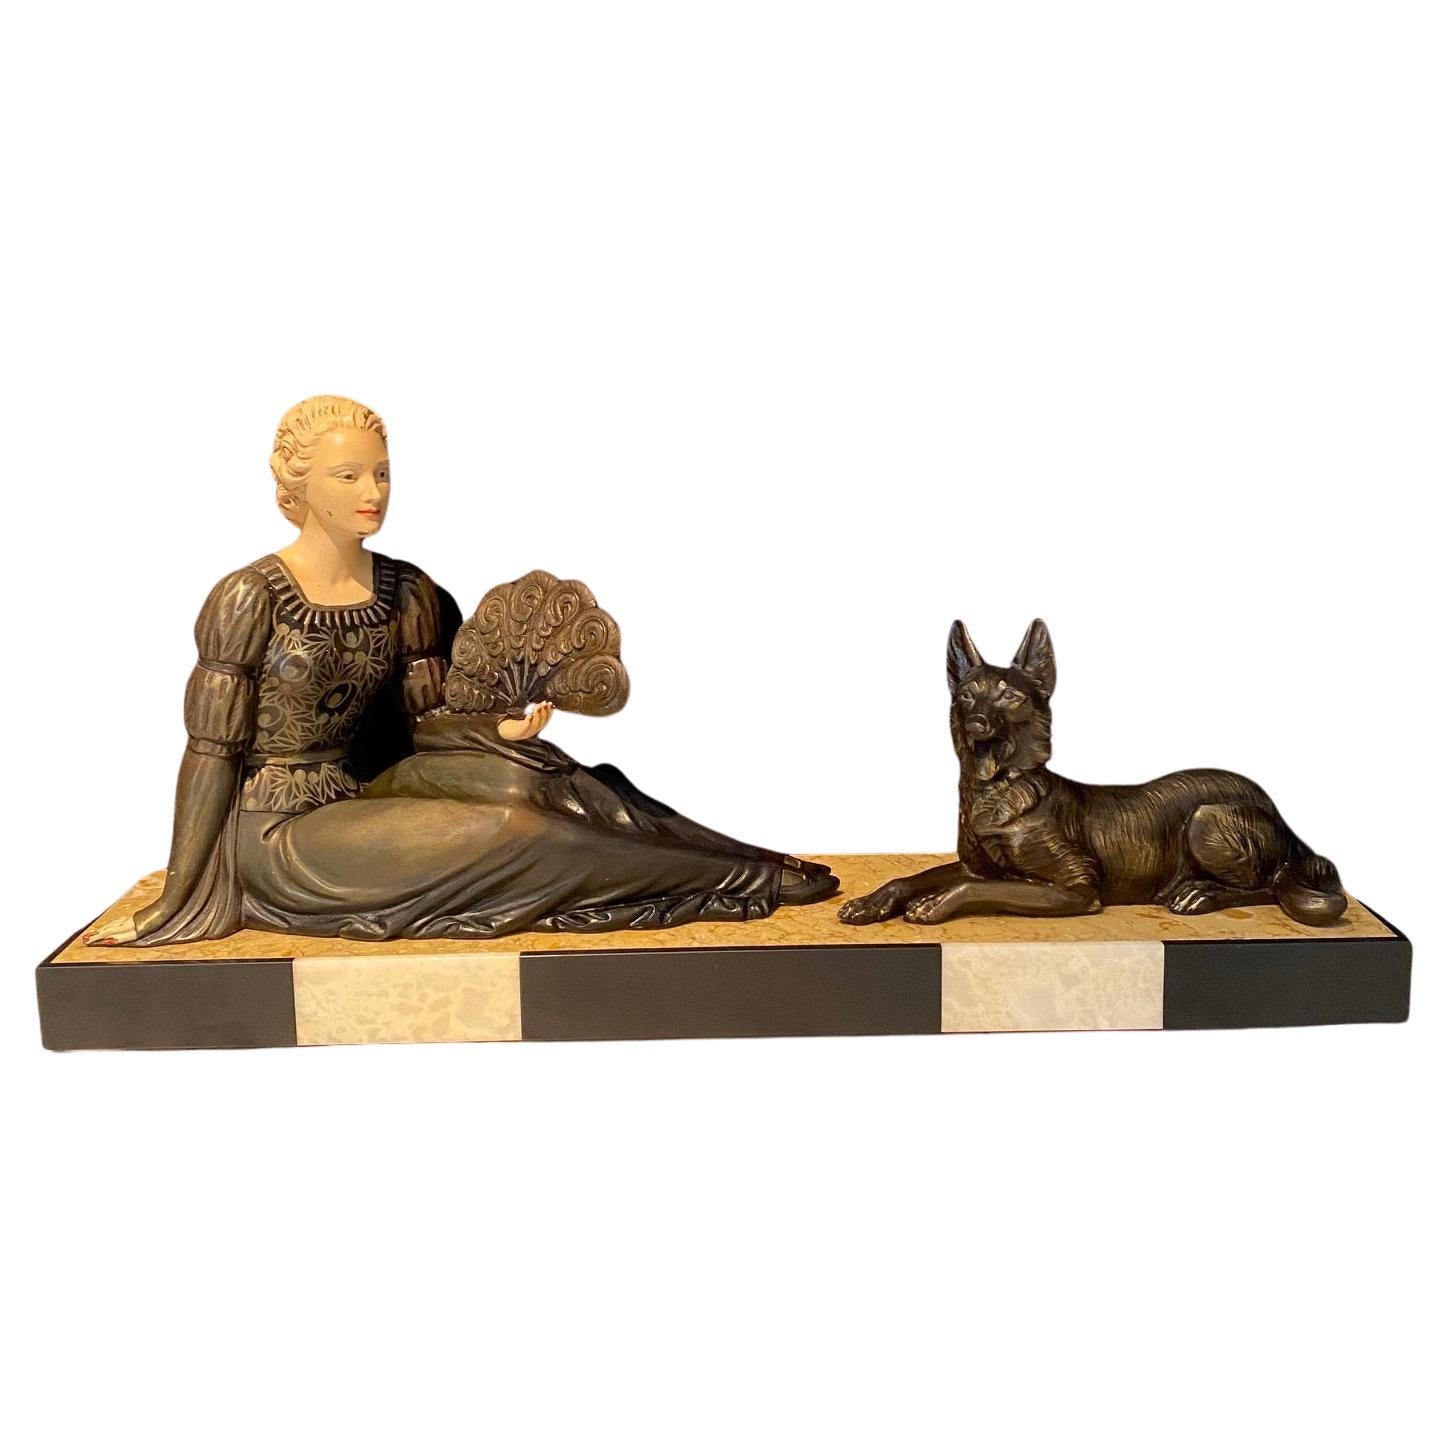 Enchanting French Art Deco Sculpture of Lady with Fan and German Shepherd For Sale